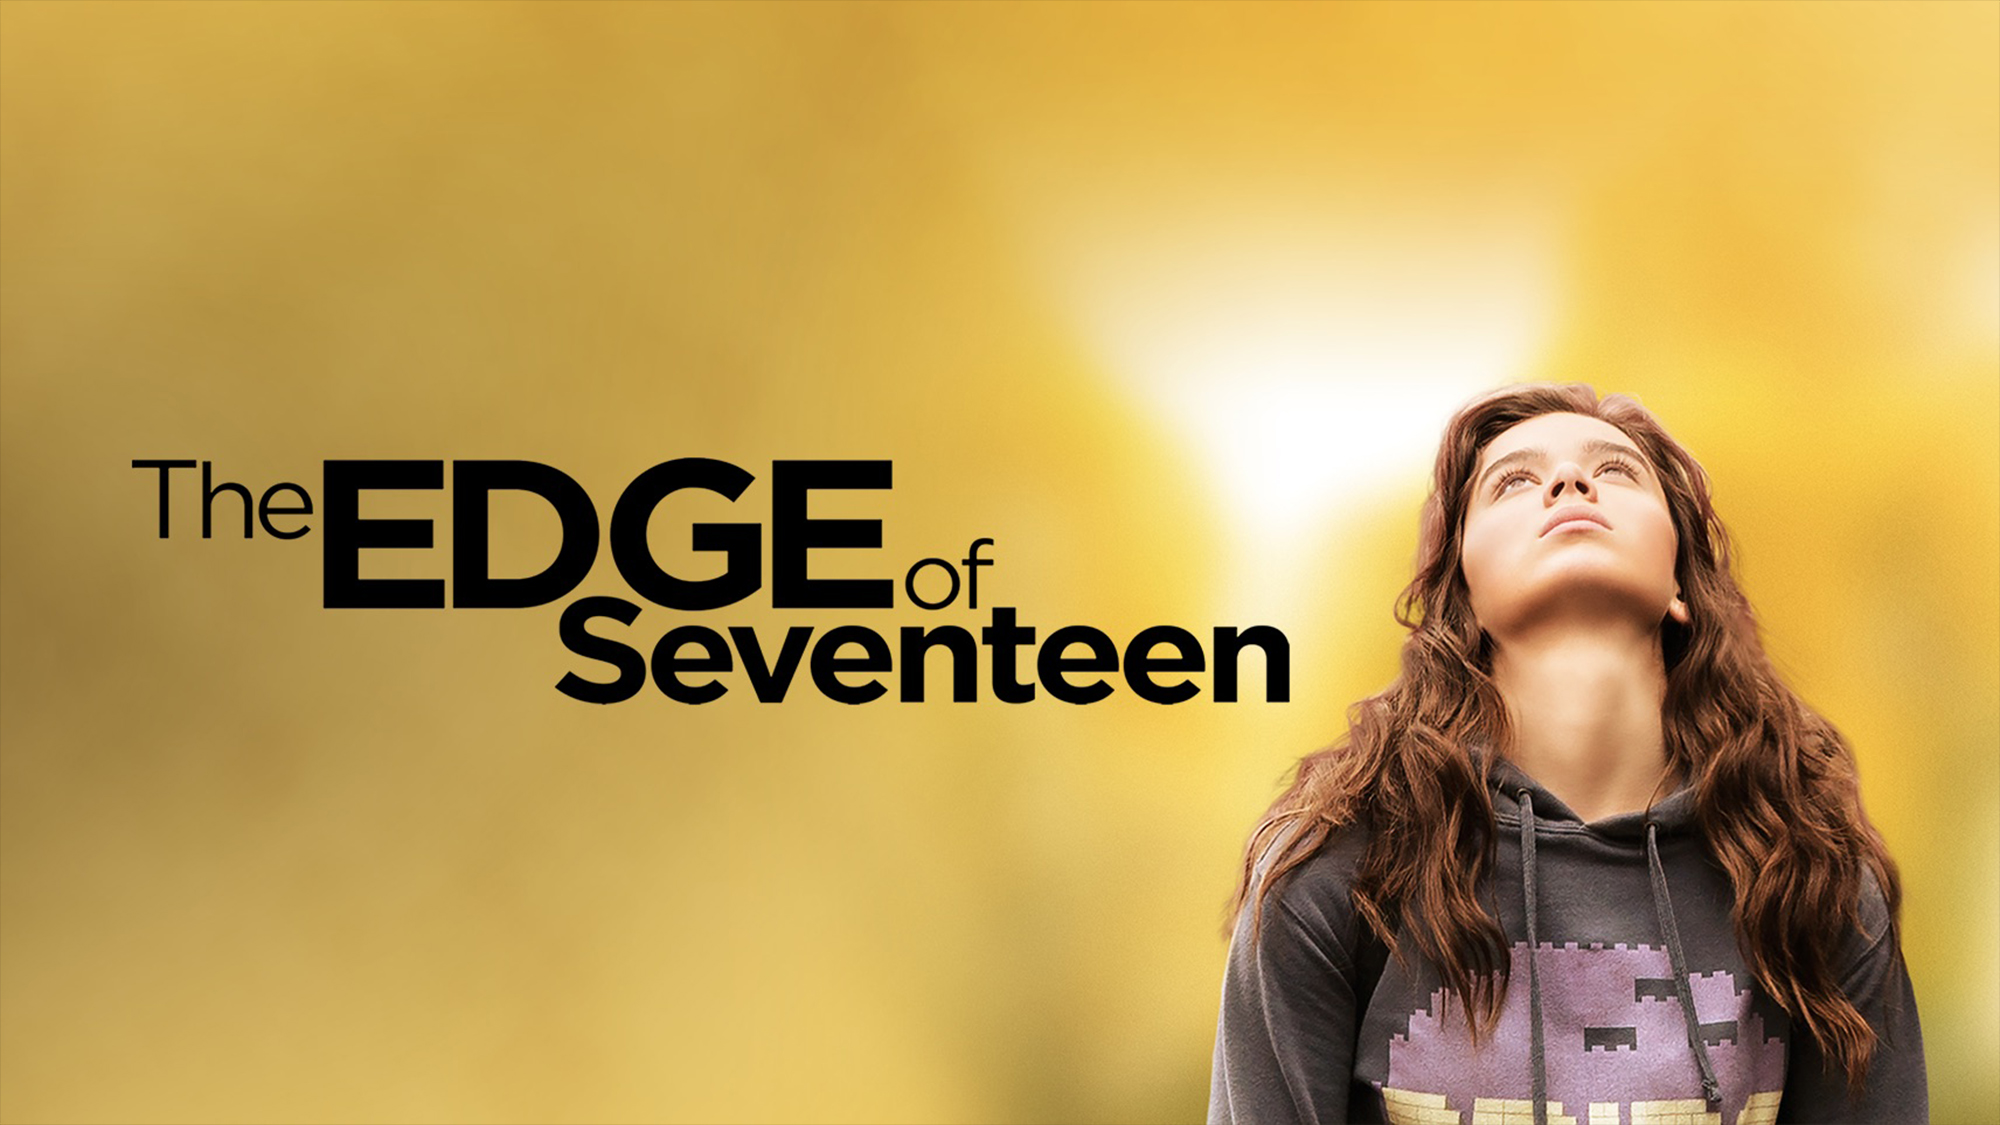 Movie The Edge of Seventeen HD Wallpaper | Background Image